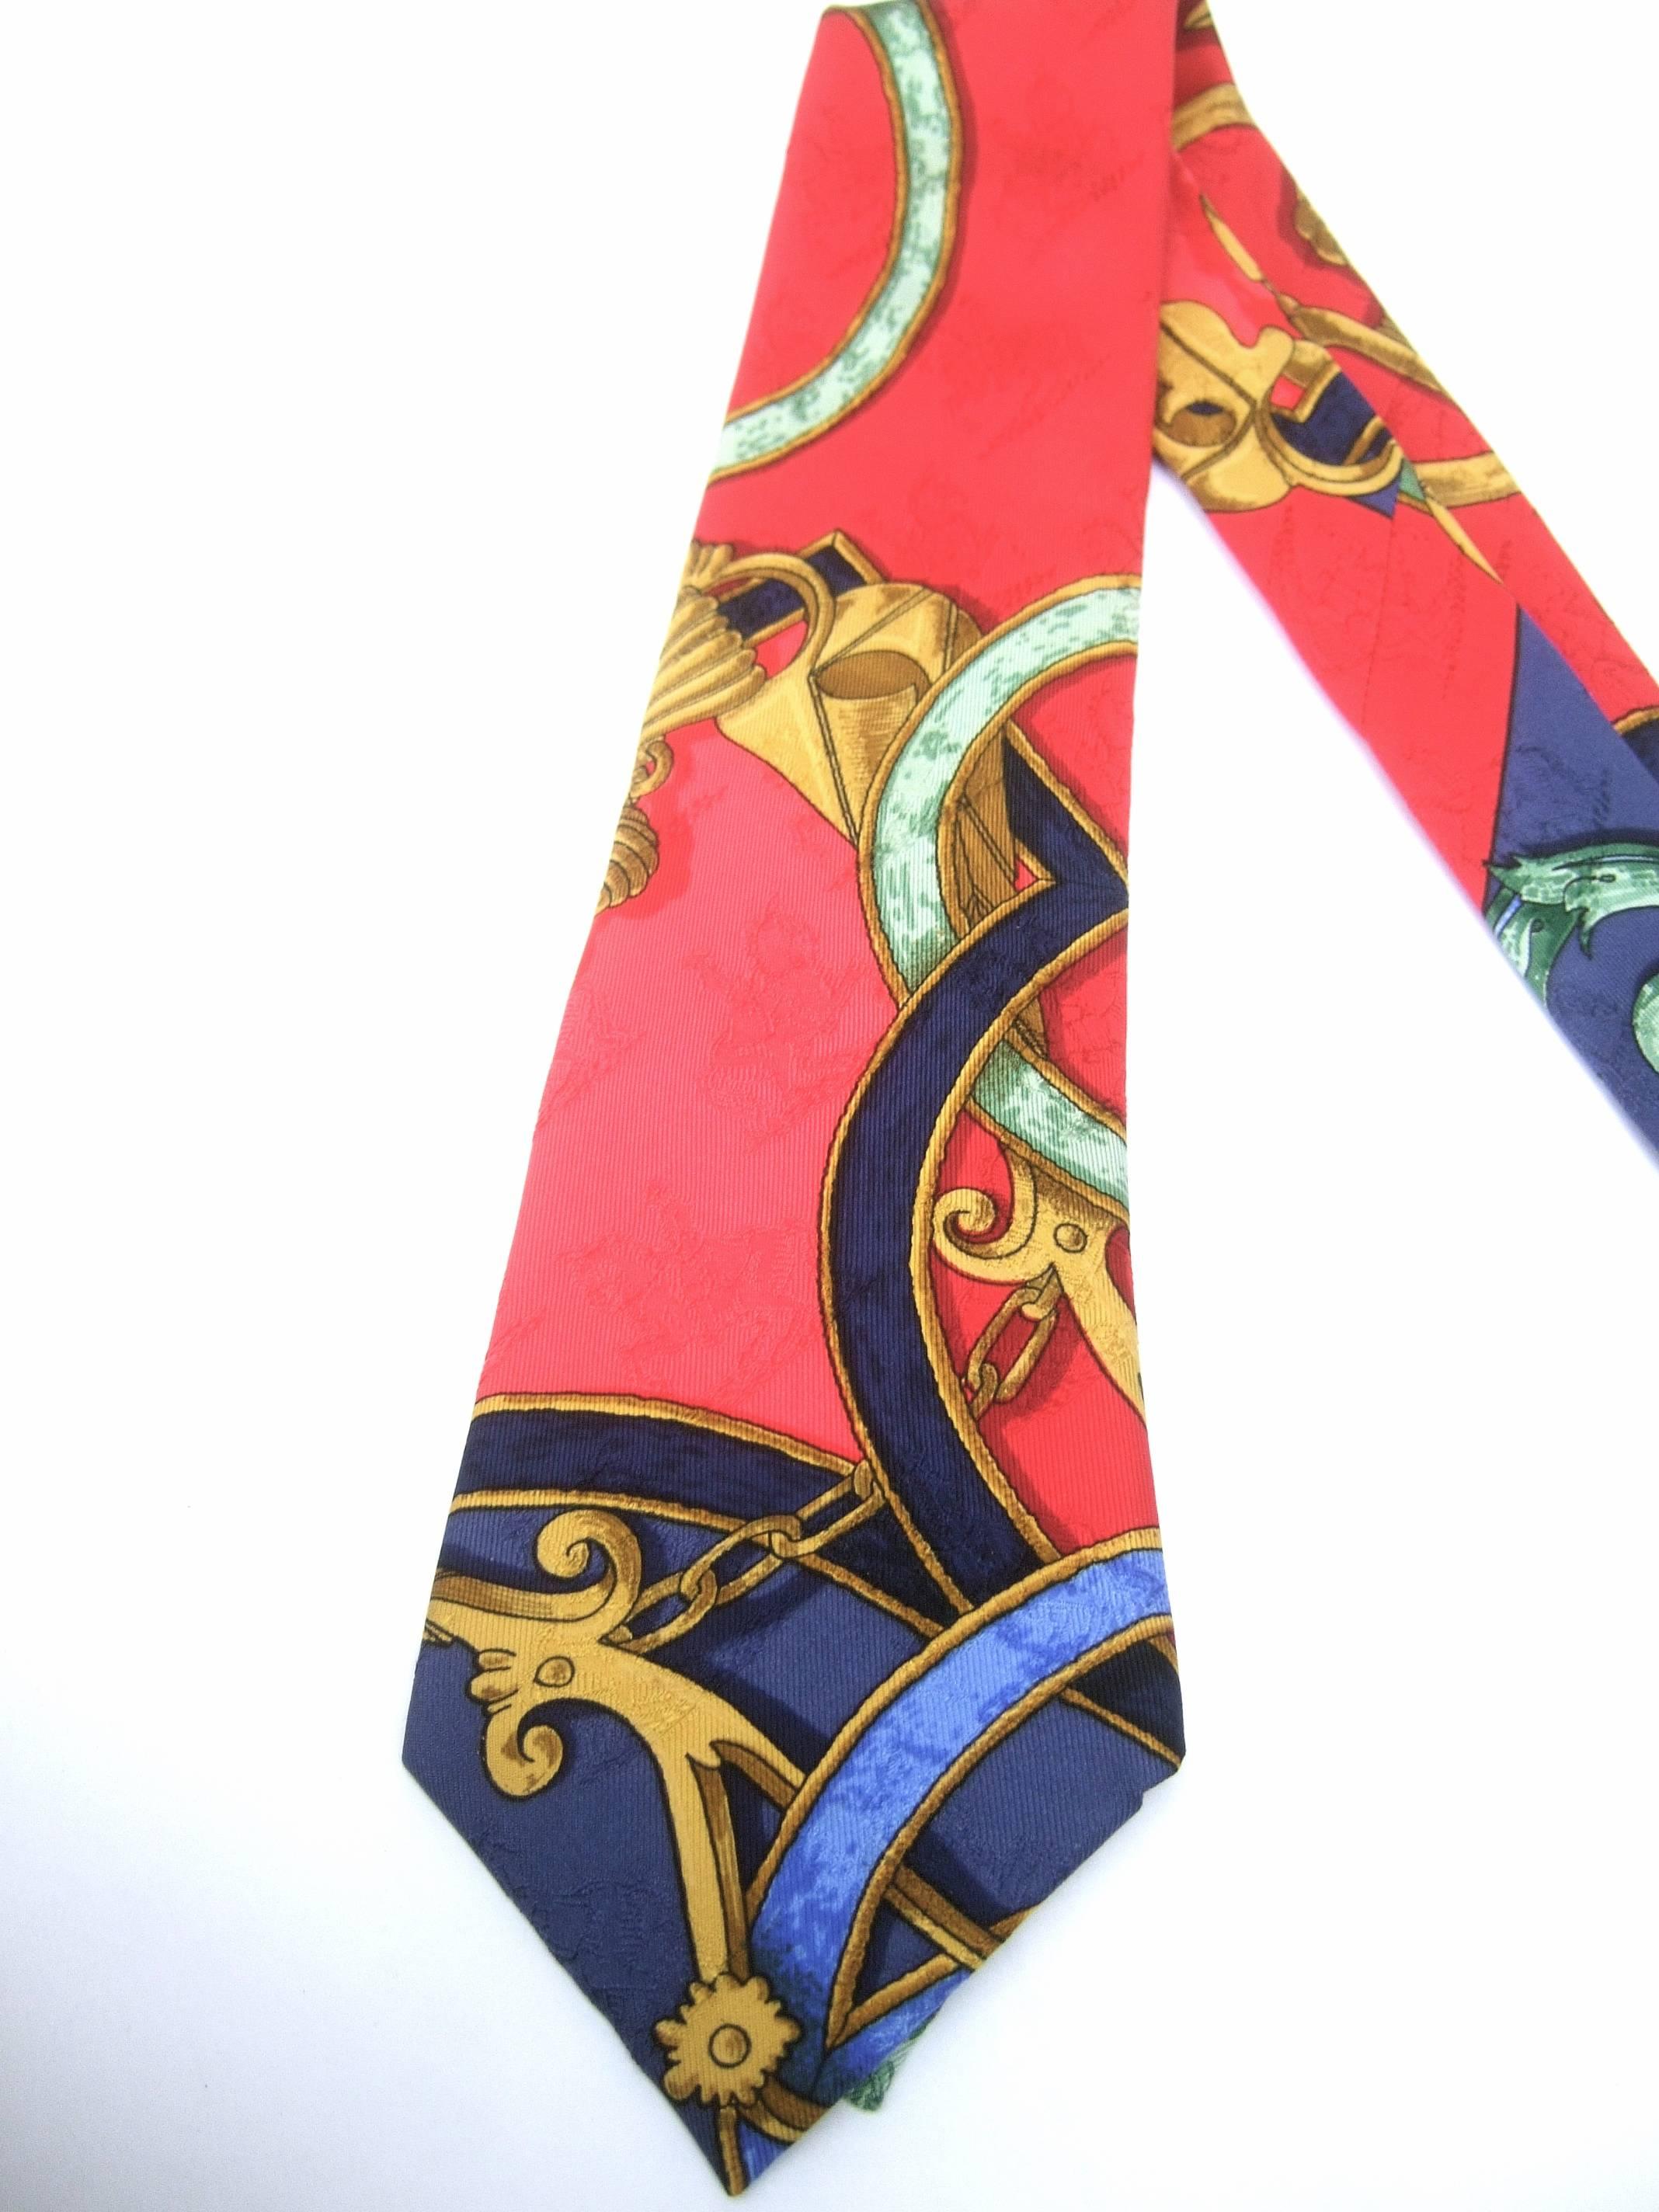 Hermes Paris Elegant graphic print silk necktie c 1990s
The stylish silk necktie is illustrated with golden buckles 
and gilt style chains that are illuminated against 
a crimson red two-tone background

Riding horseman are subtly visible in